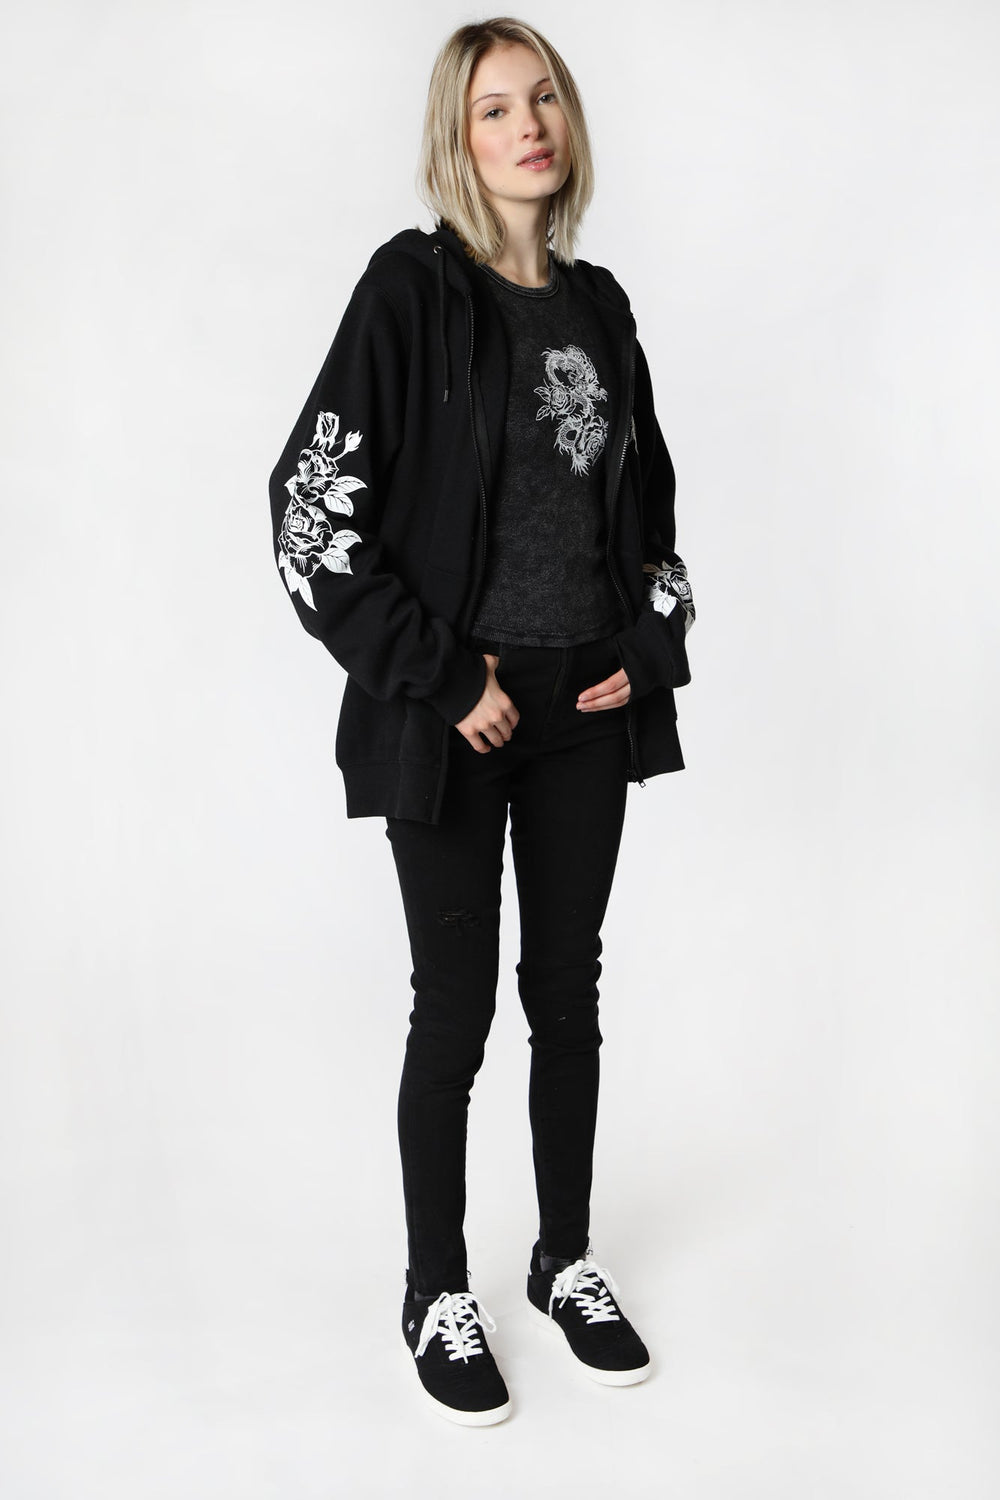 Womens Sovrn Voices Dragon and Roses Zip-Up Hoodie Womens Sovrn Voices Dragon and Roses Zip-Up Hoodie